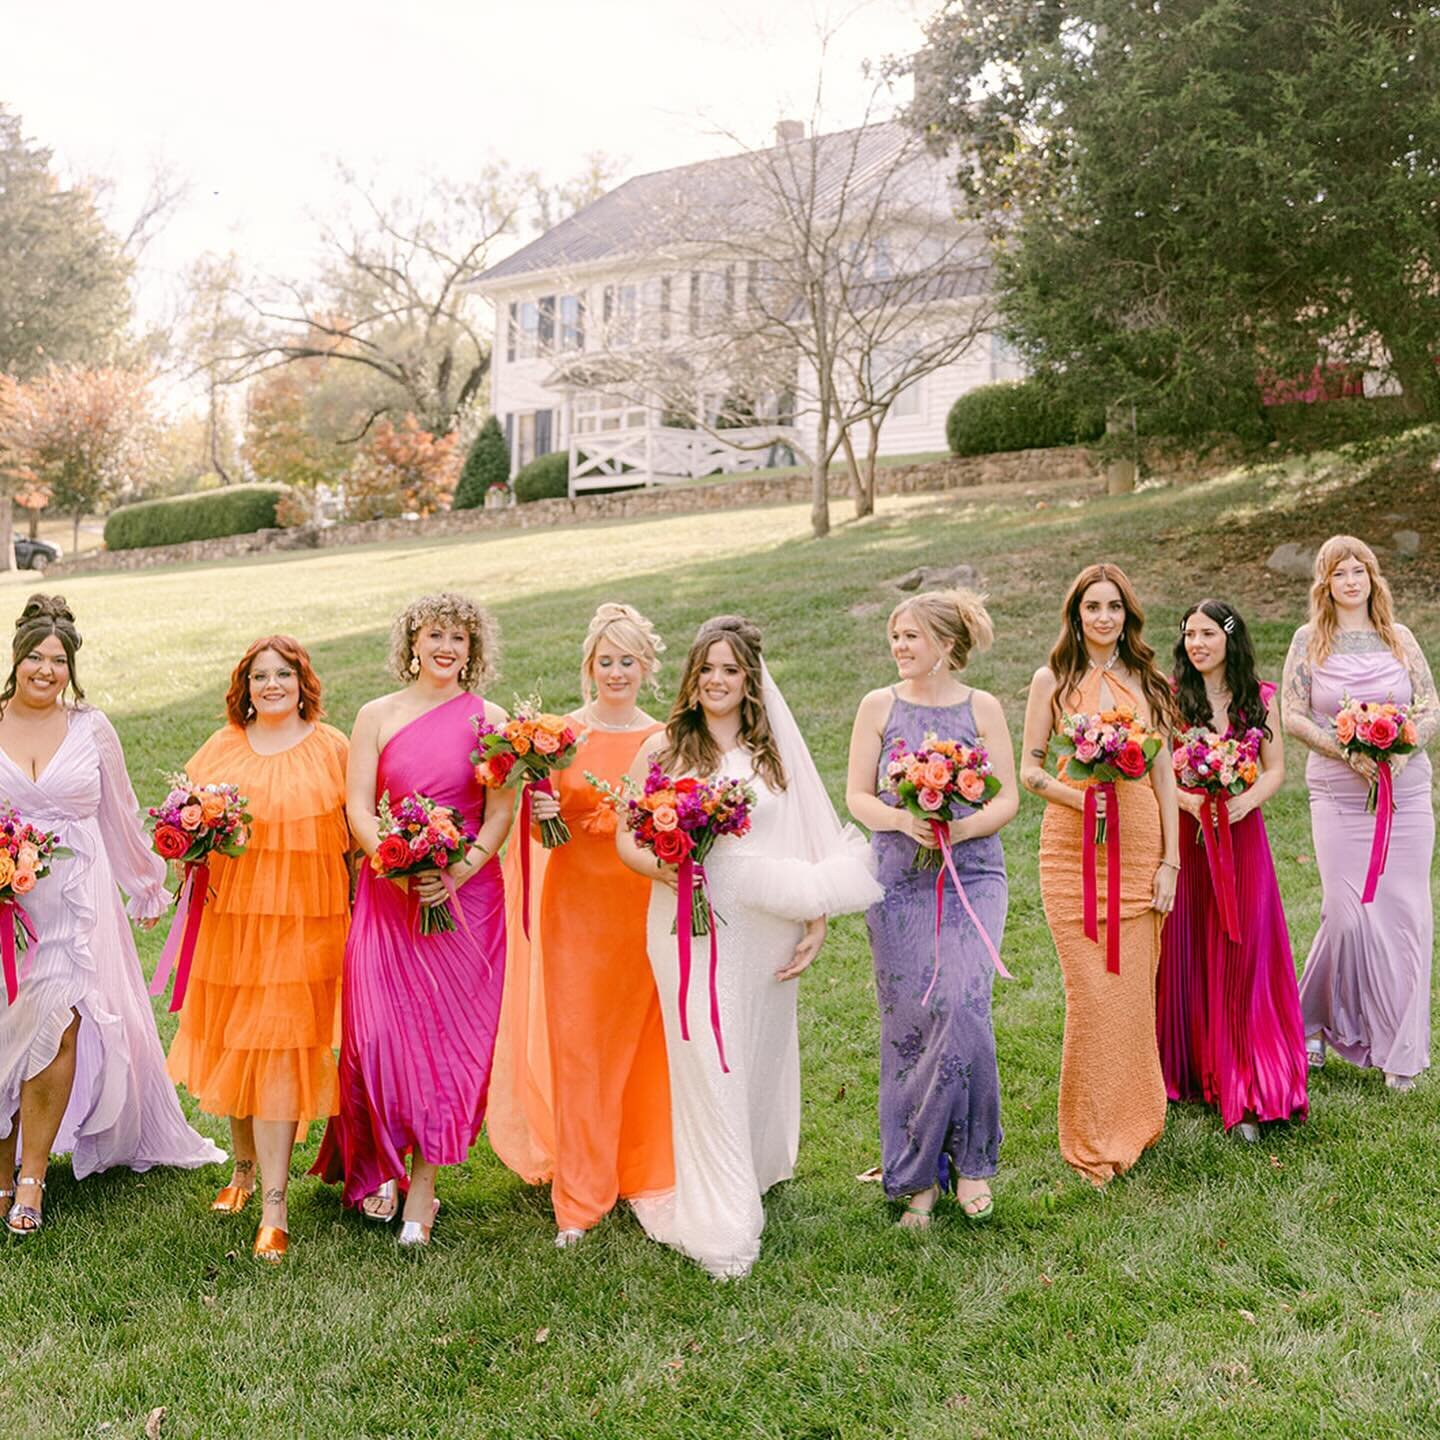 The bridal party color palette, adorned with vibrant pinks and oranges, creates a stunning visual symphony against the lush green backdrop of Sunnybrook&rsquo;s front lawn. The historic home serves as a timeless and picturesque setting, providing an 